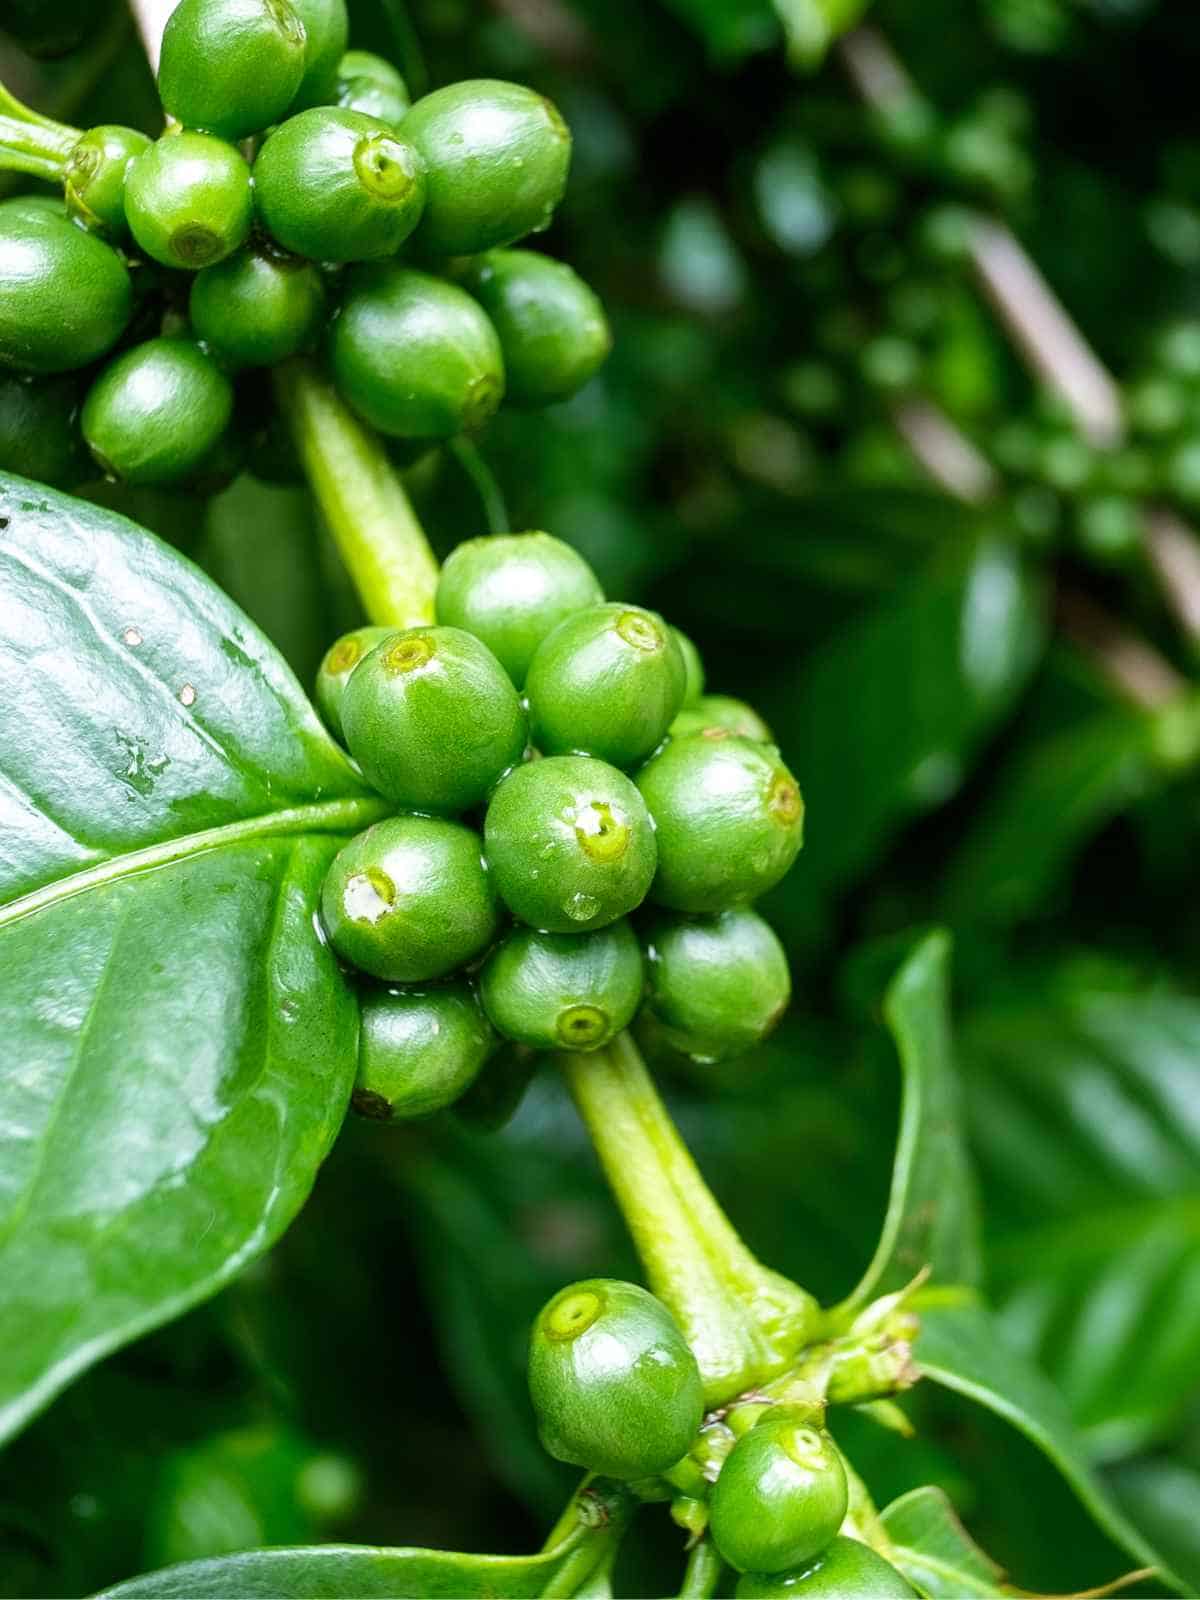 How To Grow Coffee Plant: A Guide